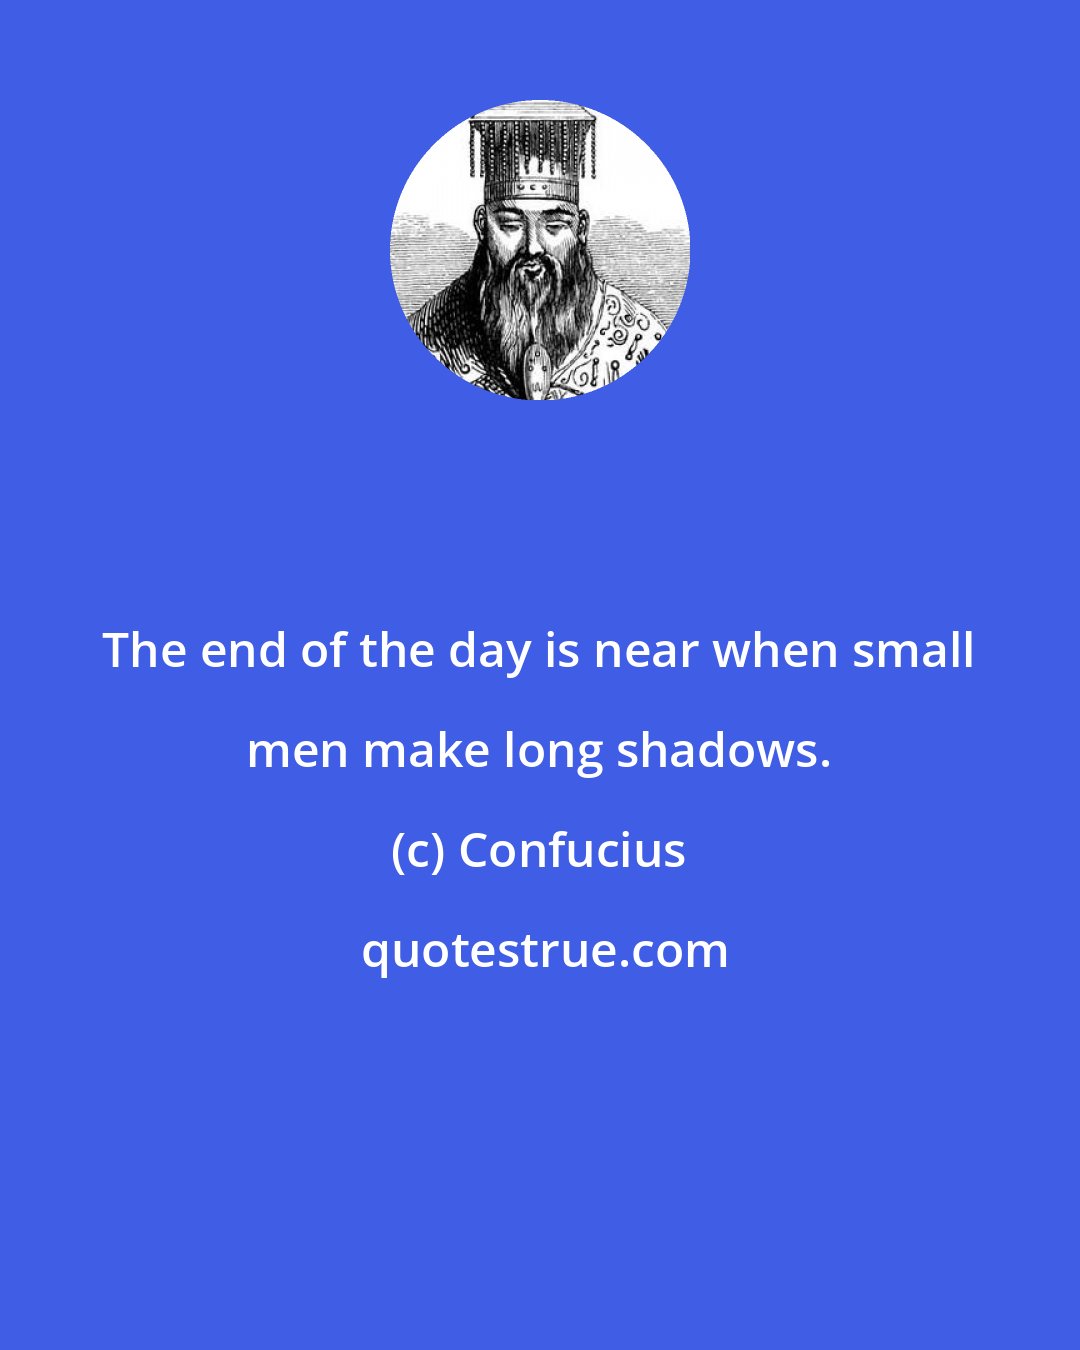 Confucius: The end of the day is near when small men make long shadows.